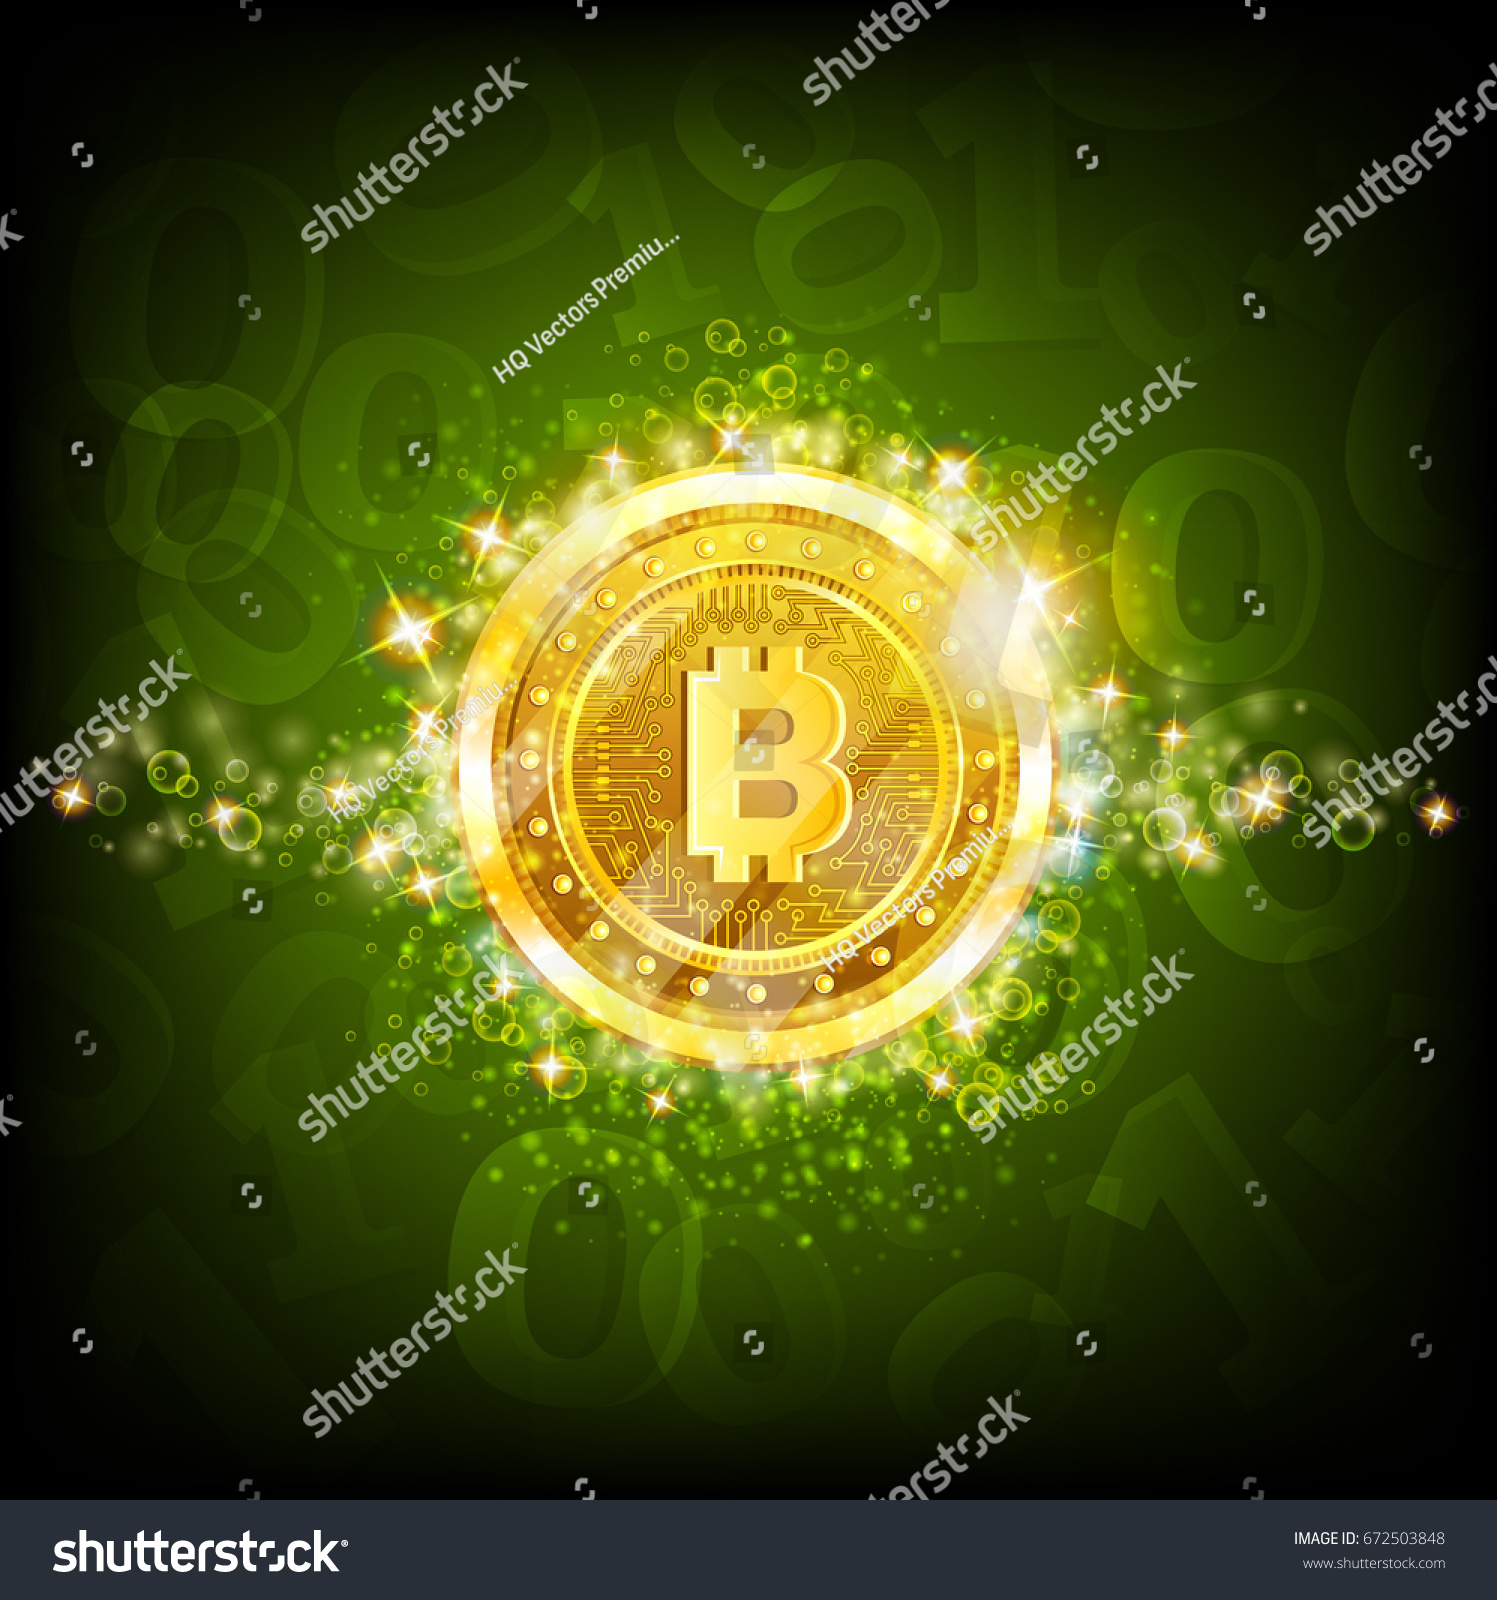 SVG of Golden bit coins with shiny sparkles in center on green glossy background with binary code svg